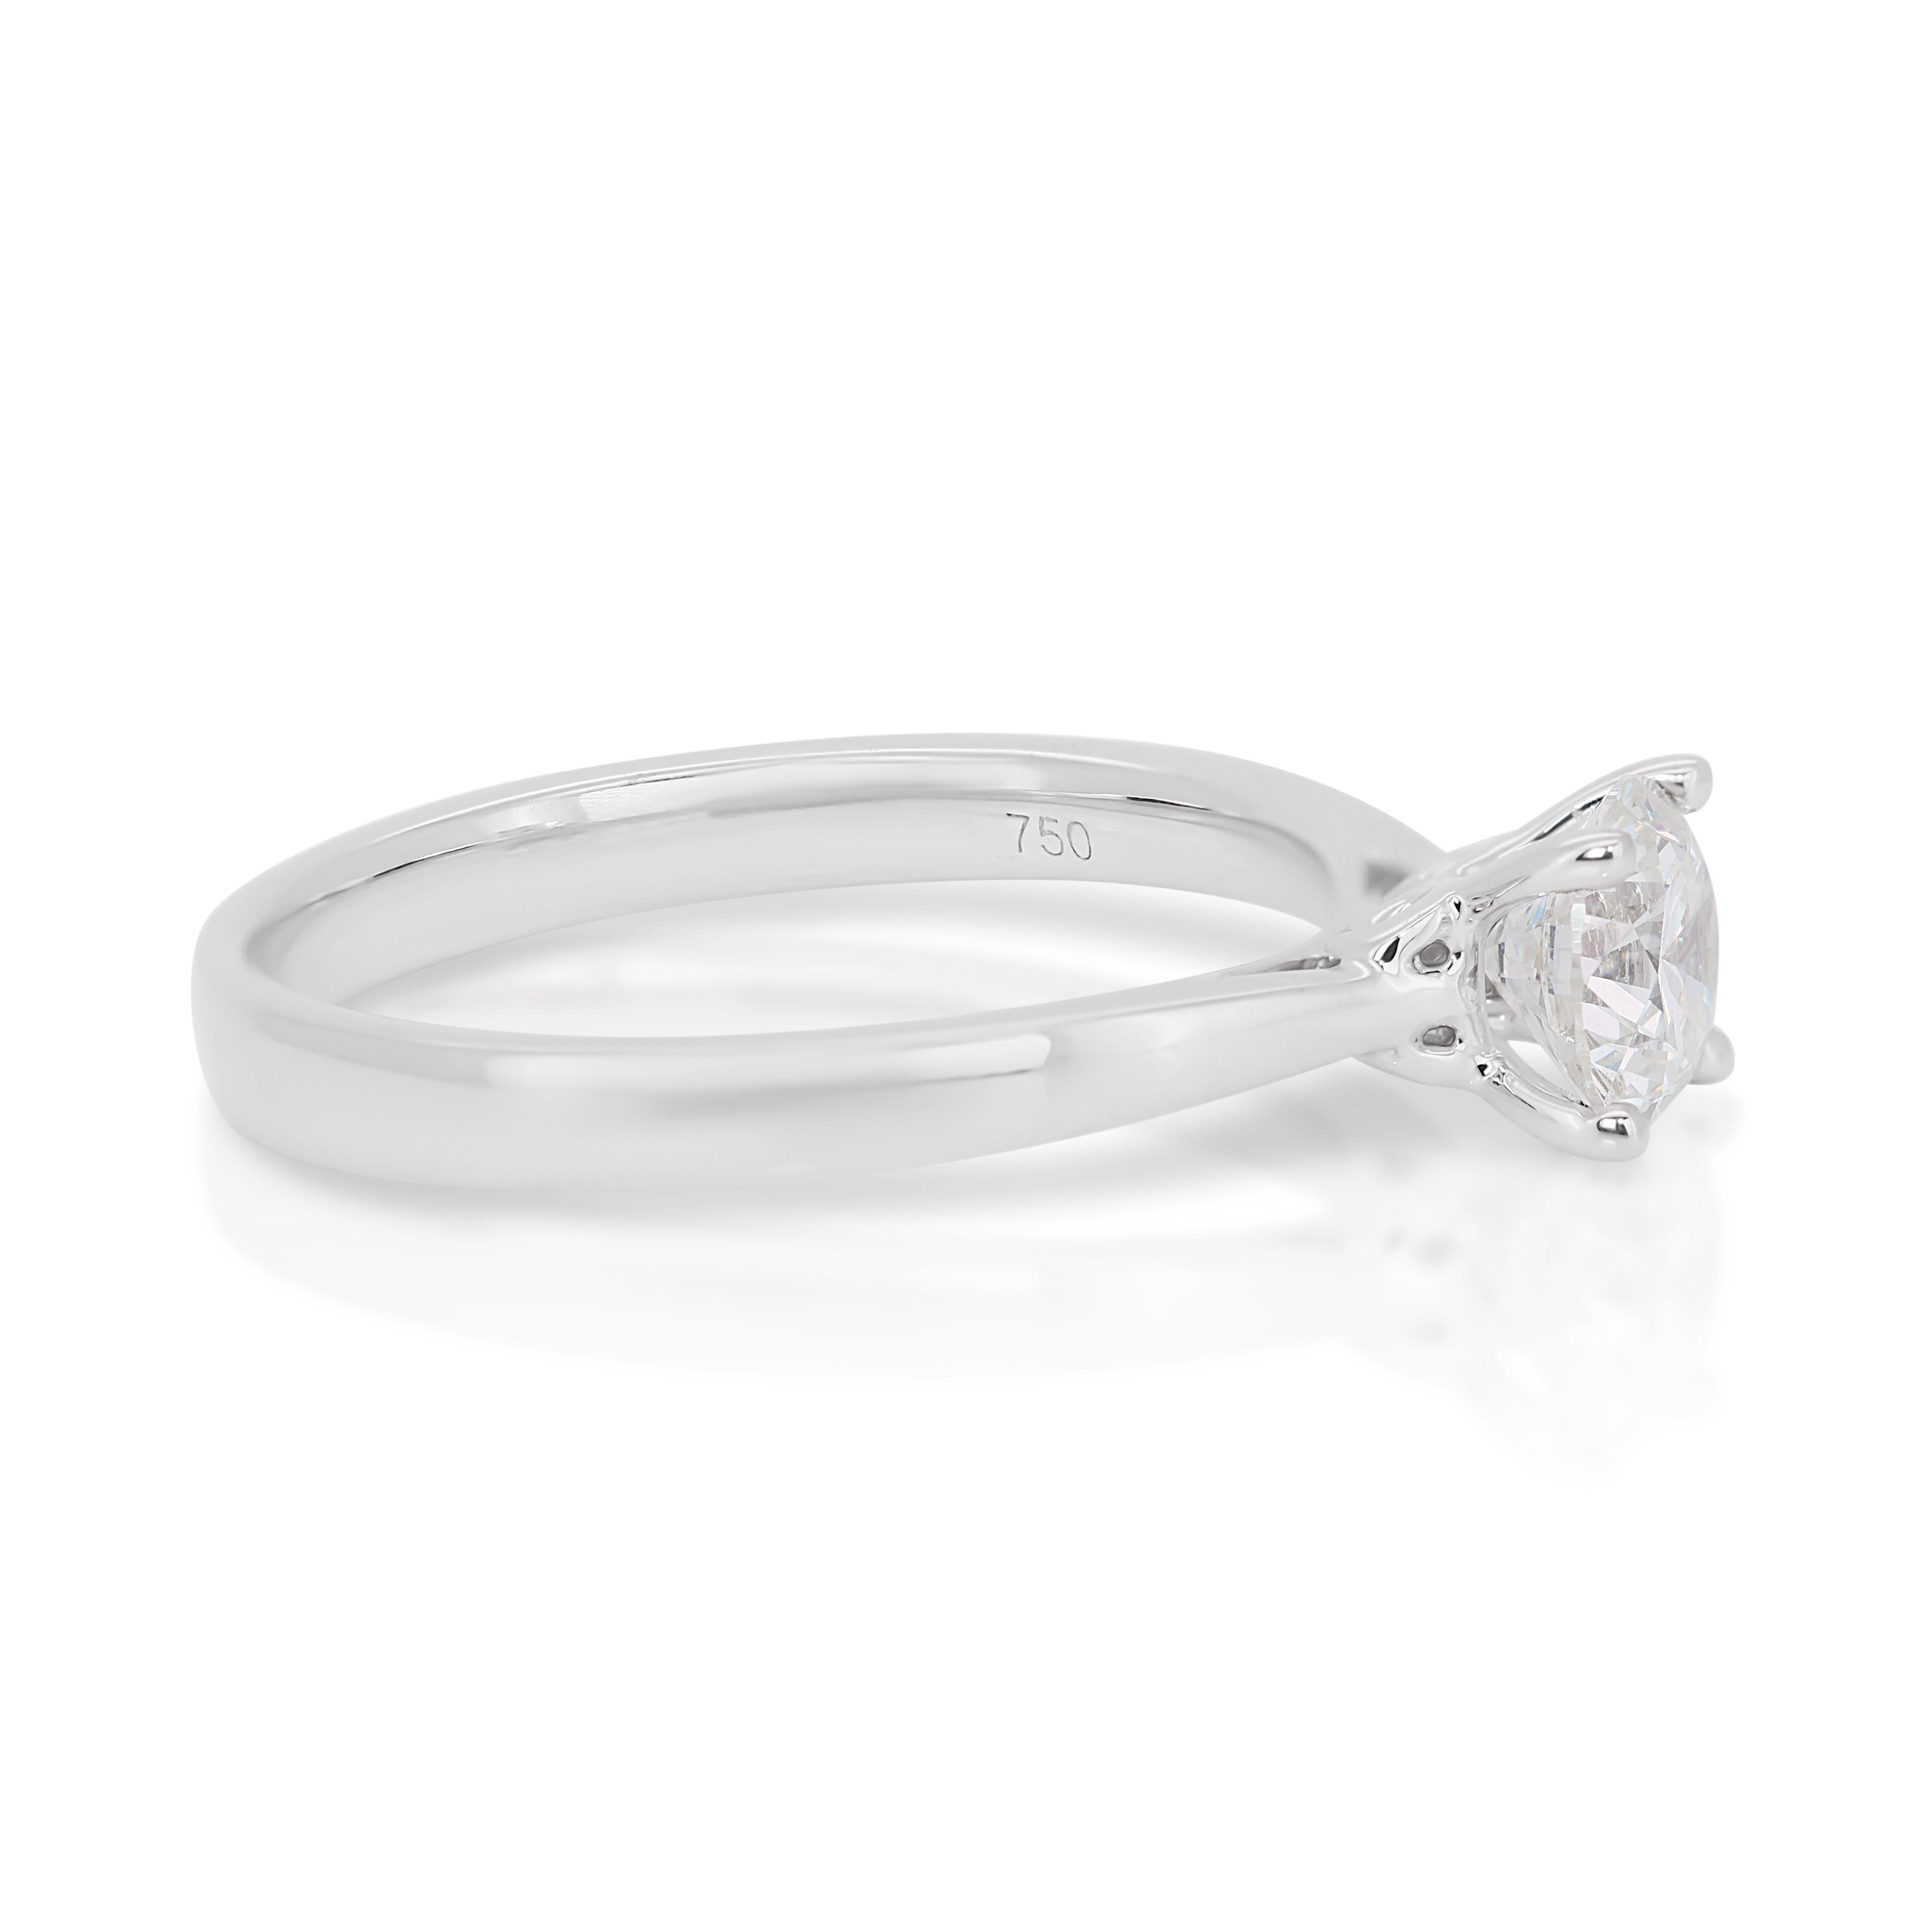 Captivating 0.55ct Diamond Solitaire Ring in 18K White Gold For Sale 3